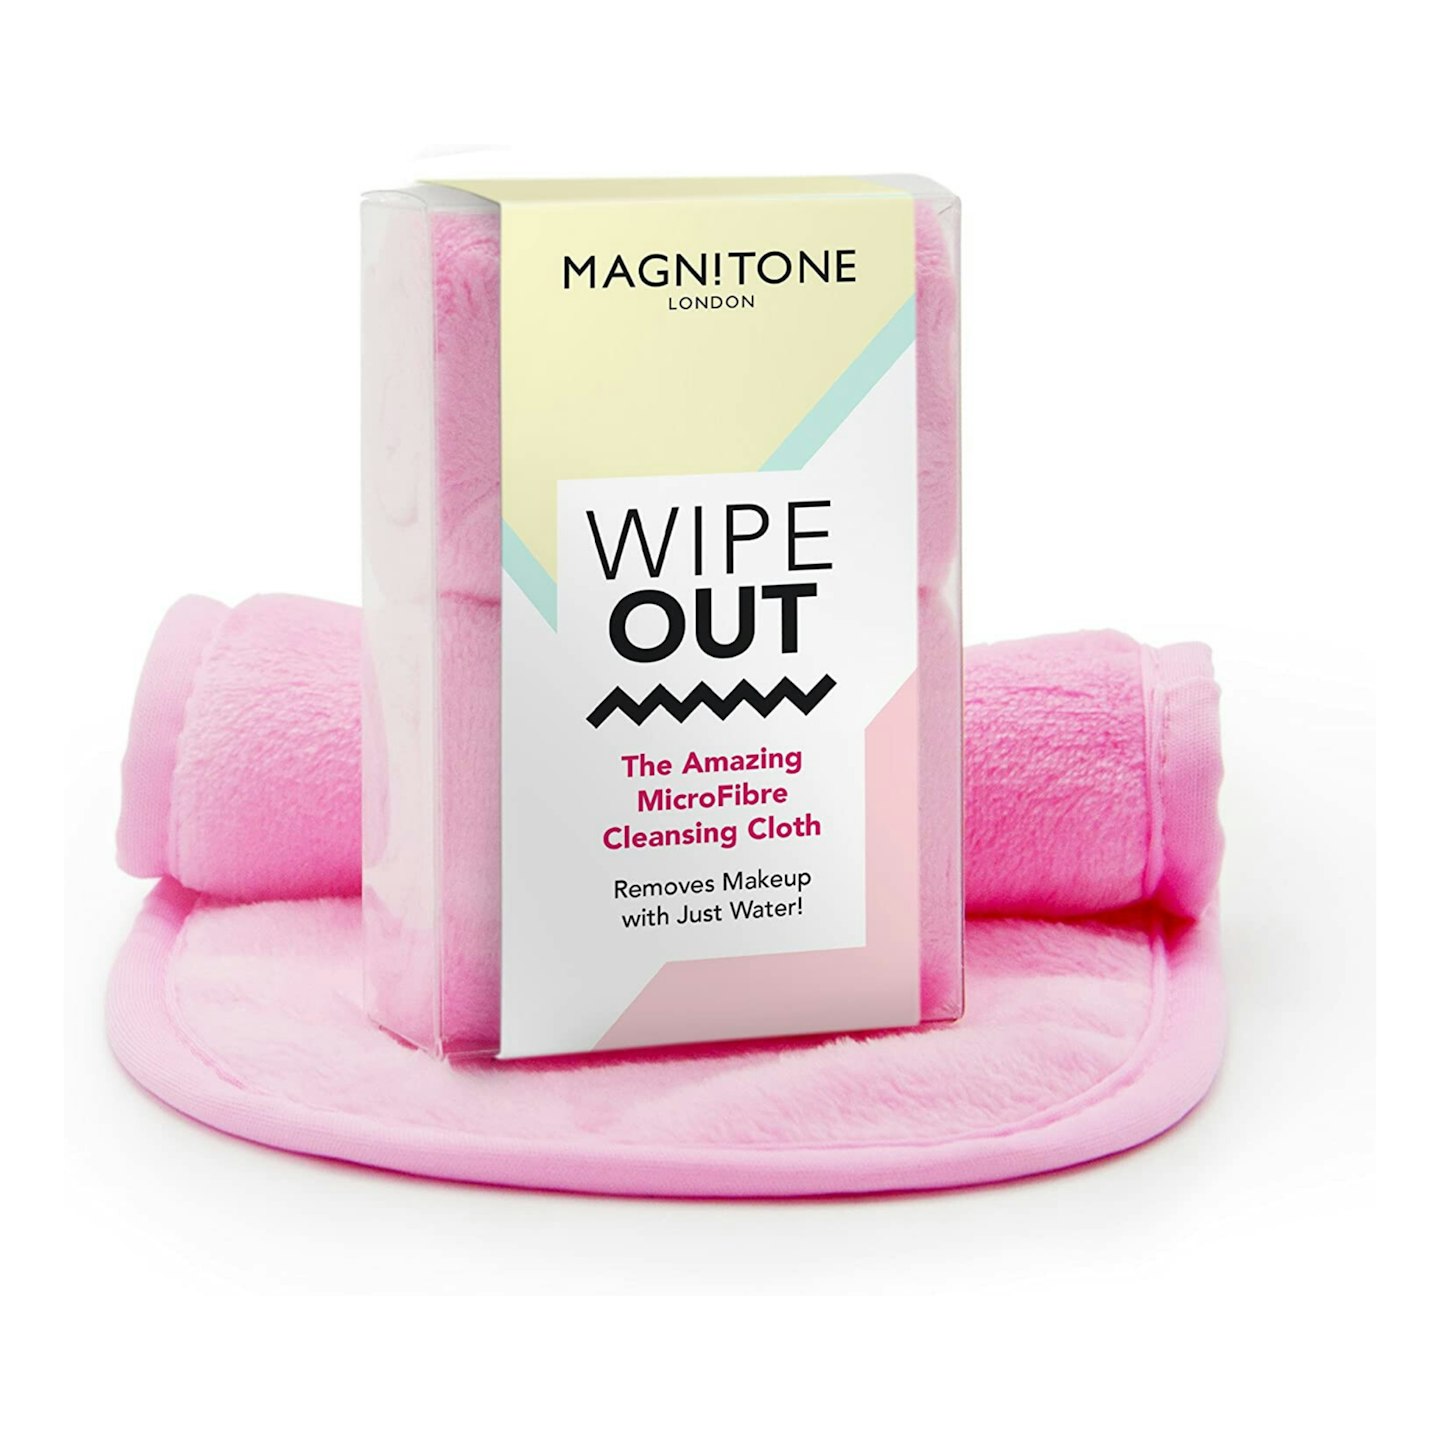 Magnitone WipeOut The Amazing MicroFibre Cleansing Cloth